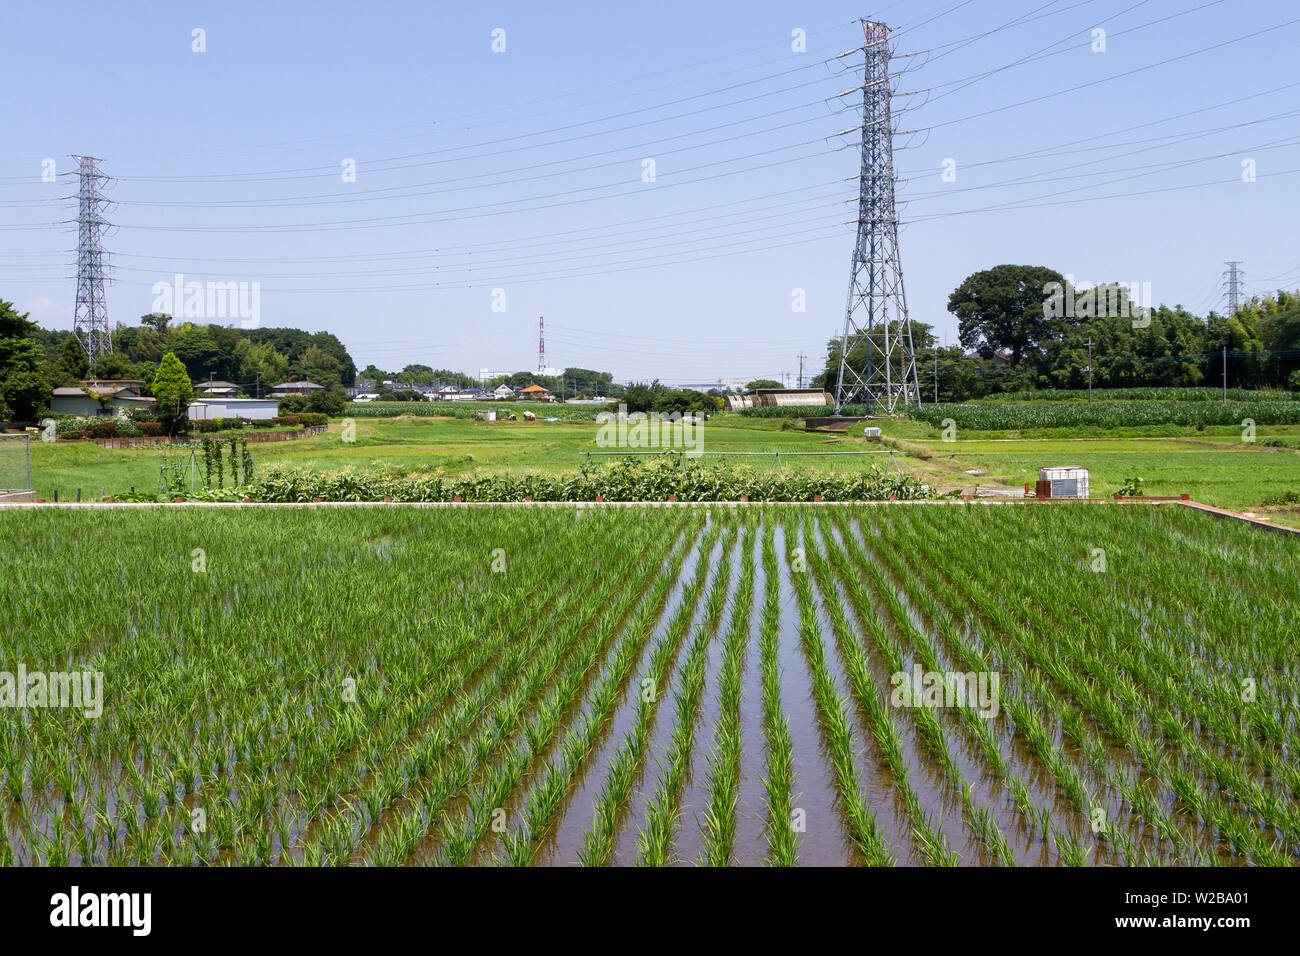 Electricity pylons over flooded rice-fields (paddy fields) in rural Kanagawa, Japan. Stock Photo